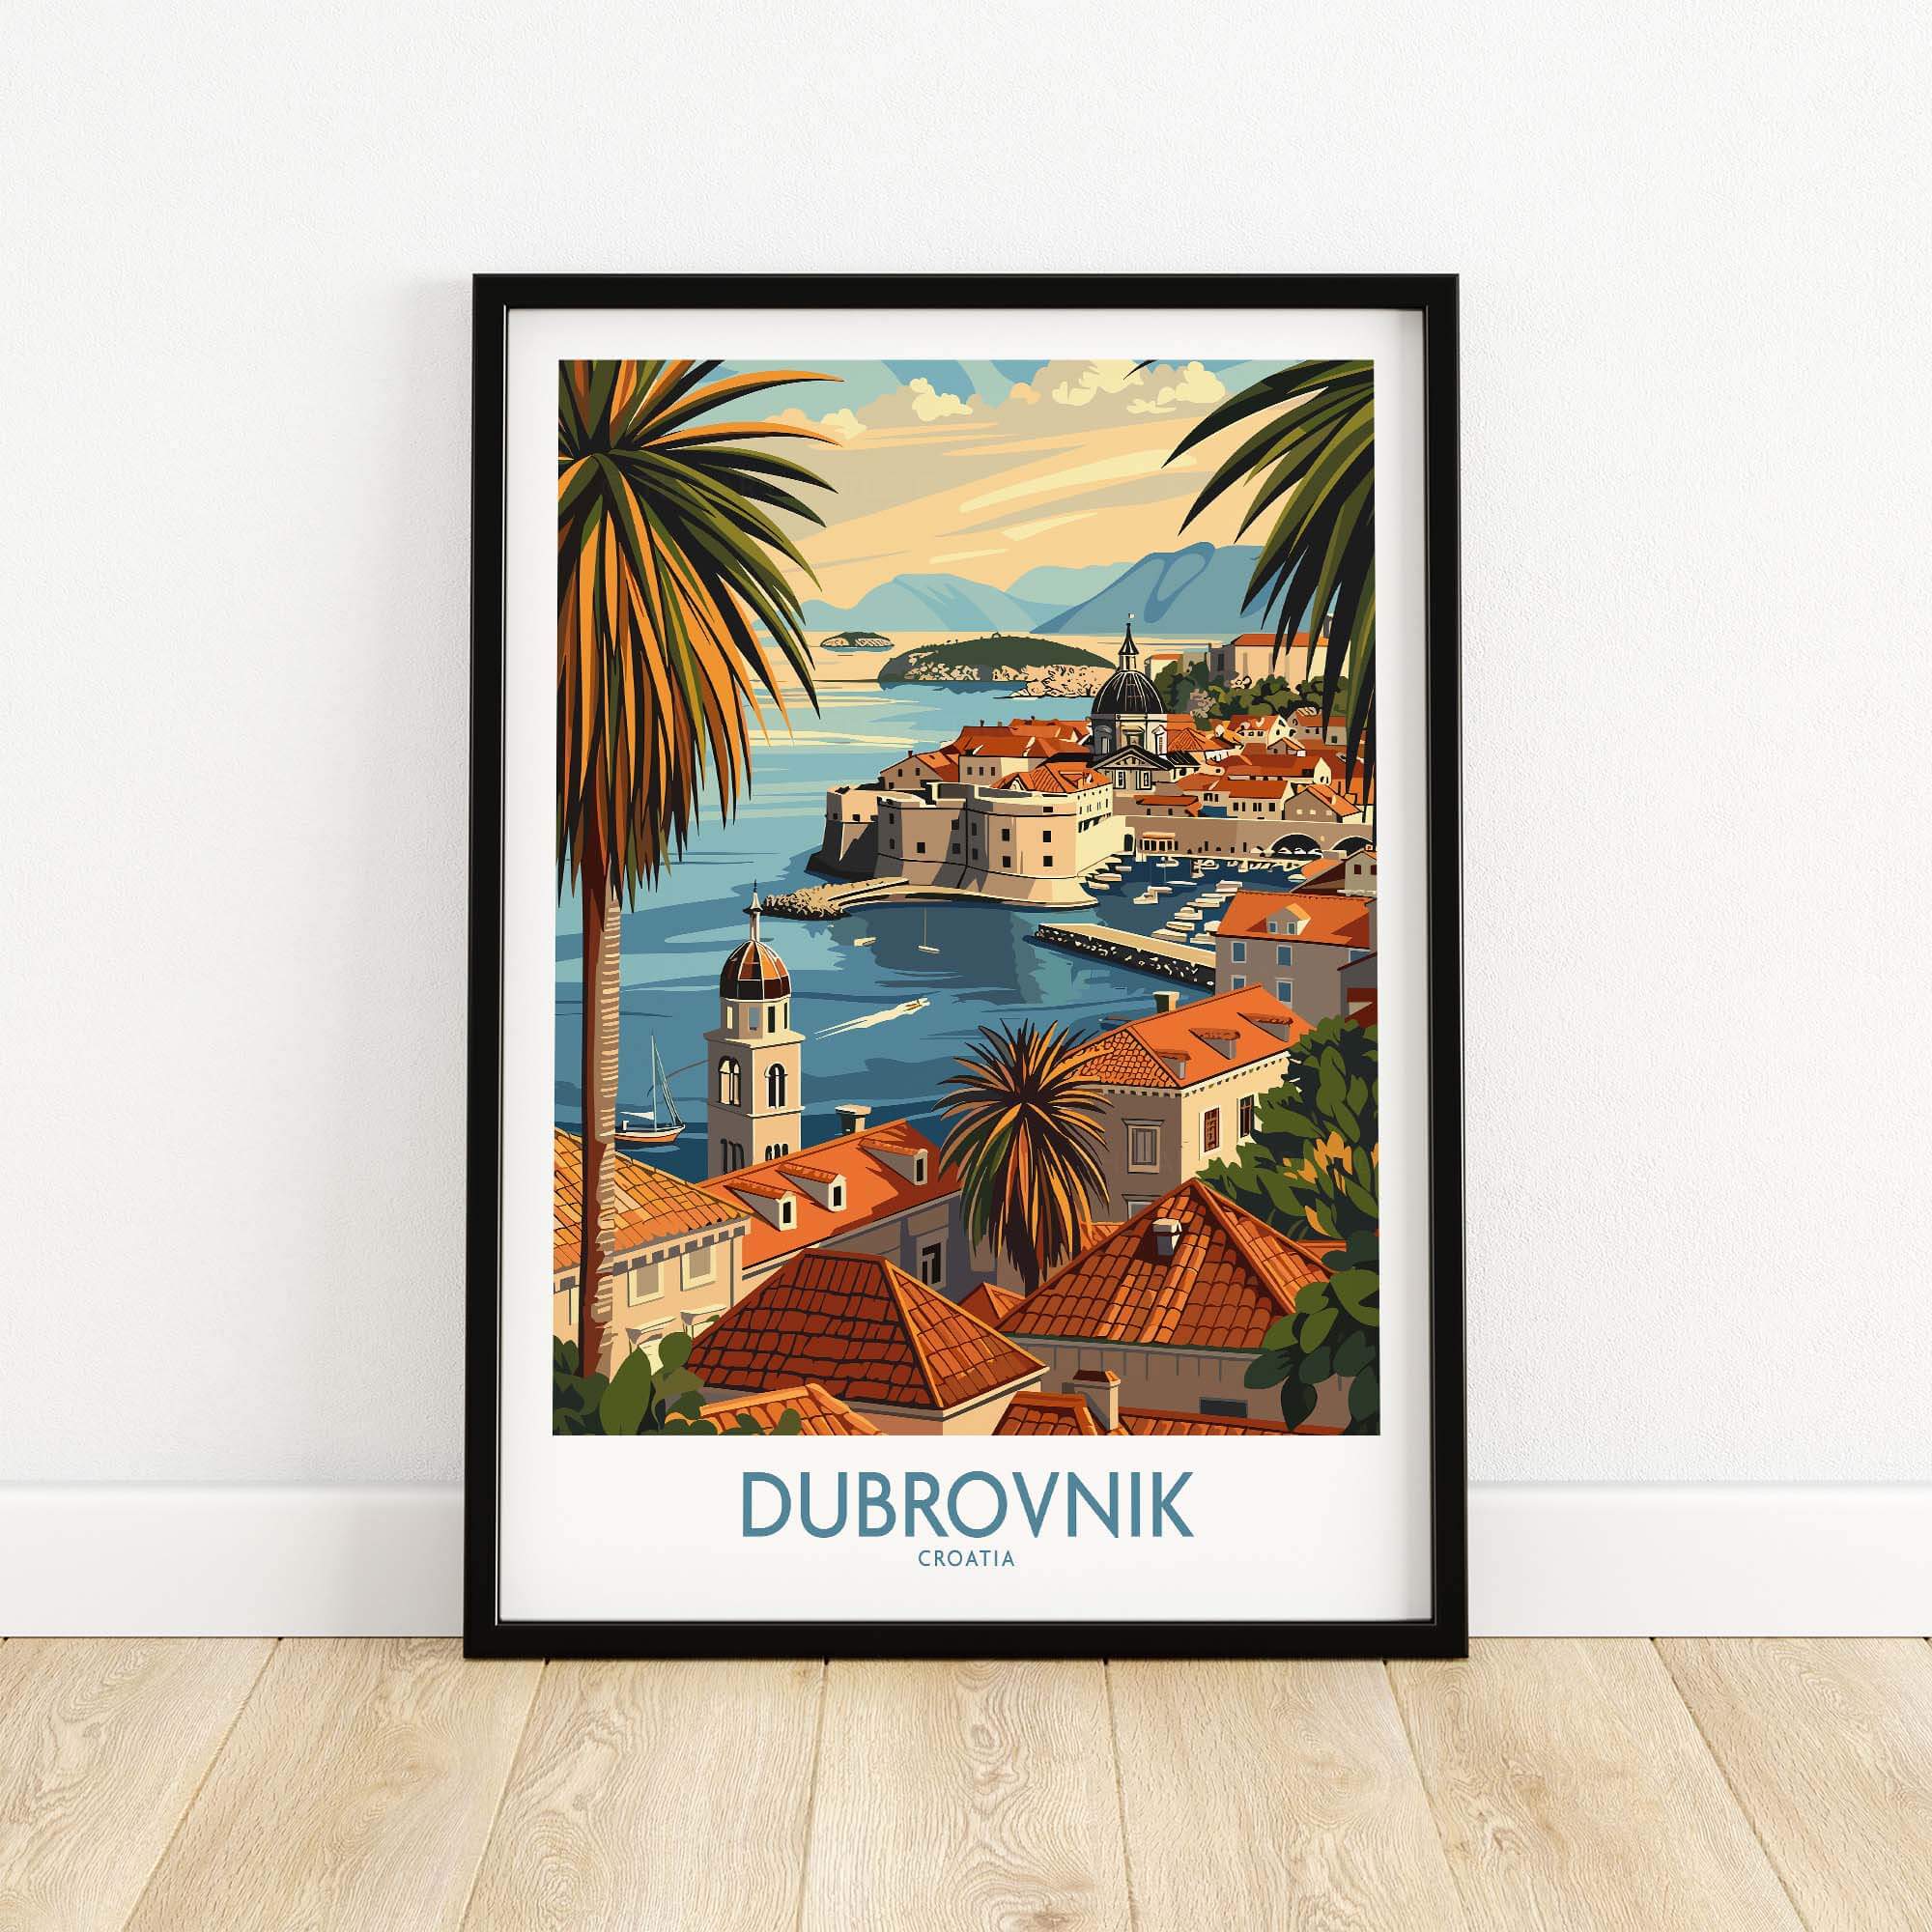 Dubrovnik Wall Art view our best collection or travel posters and prints - ThisArtWorld